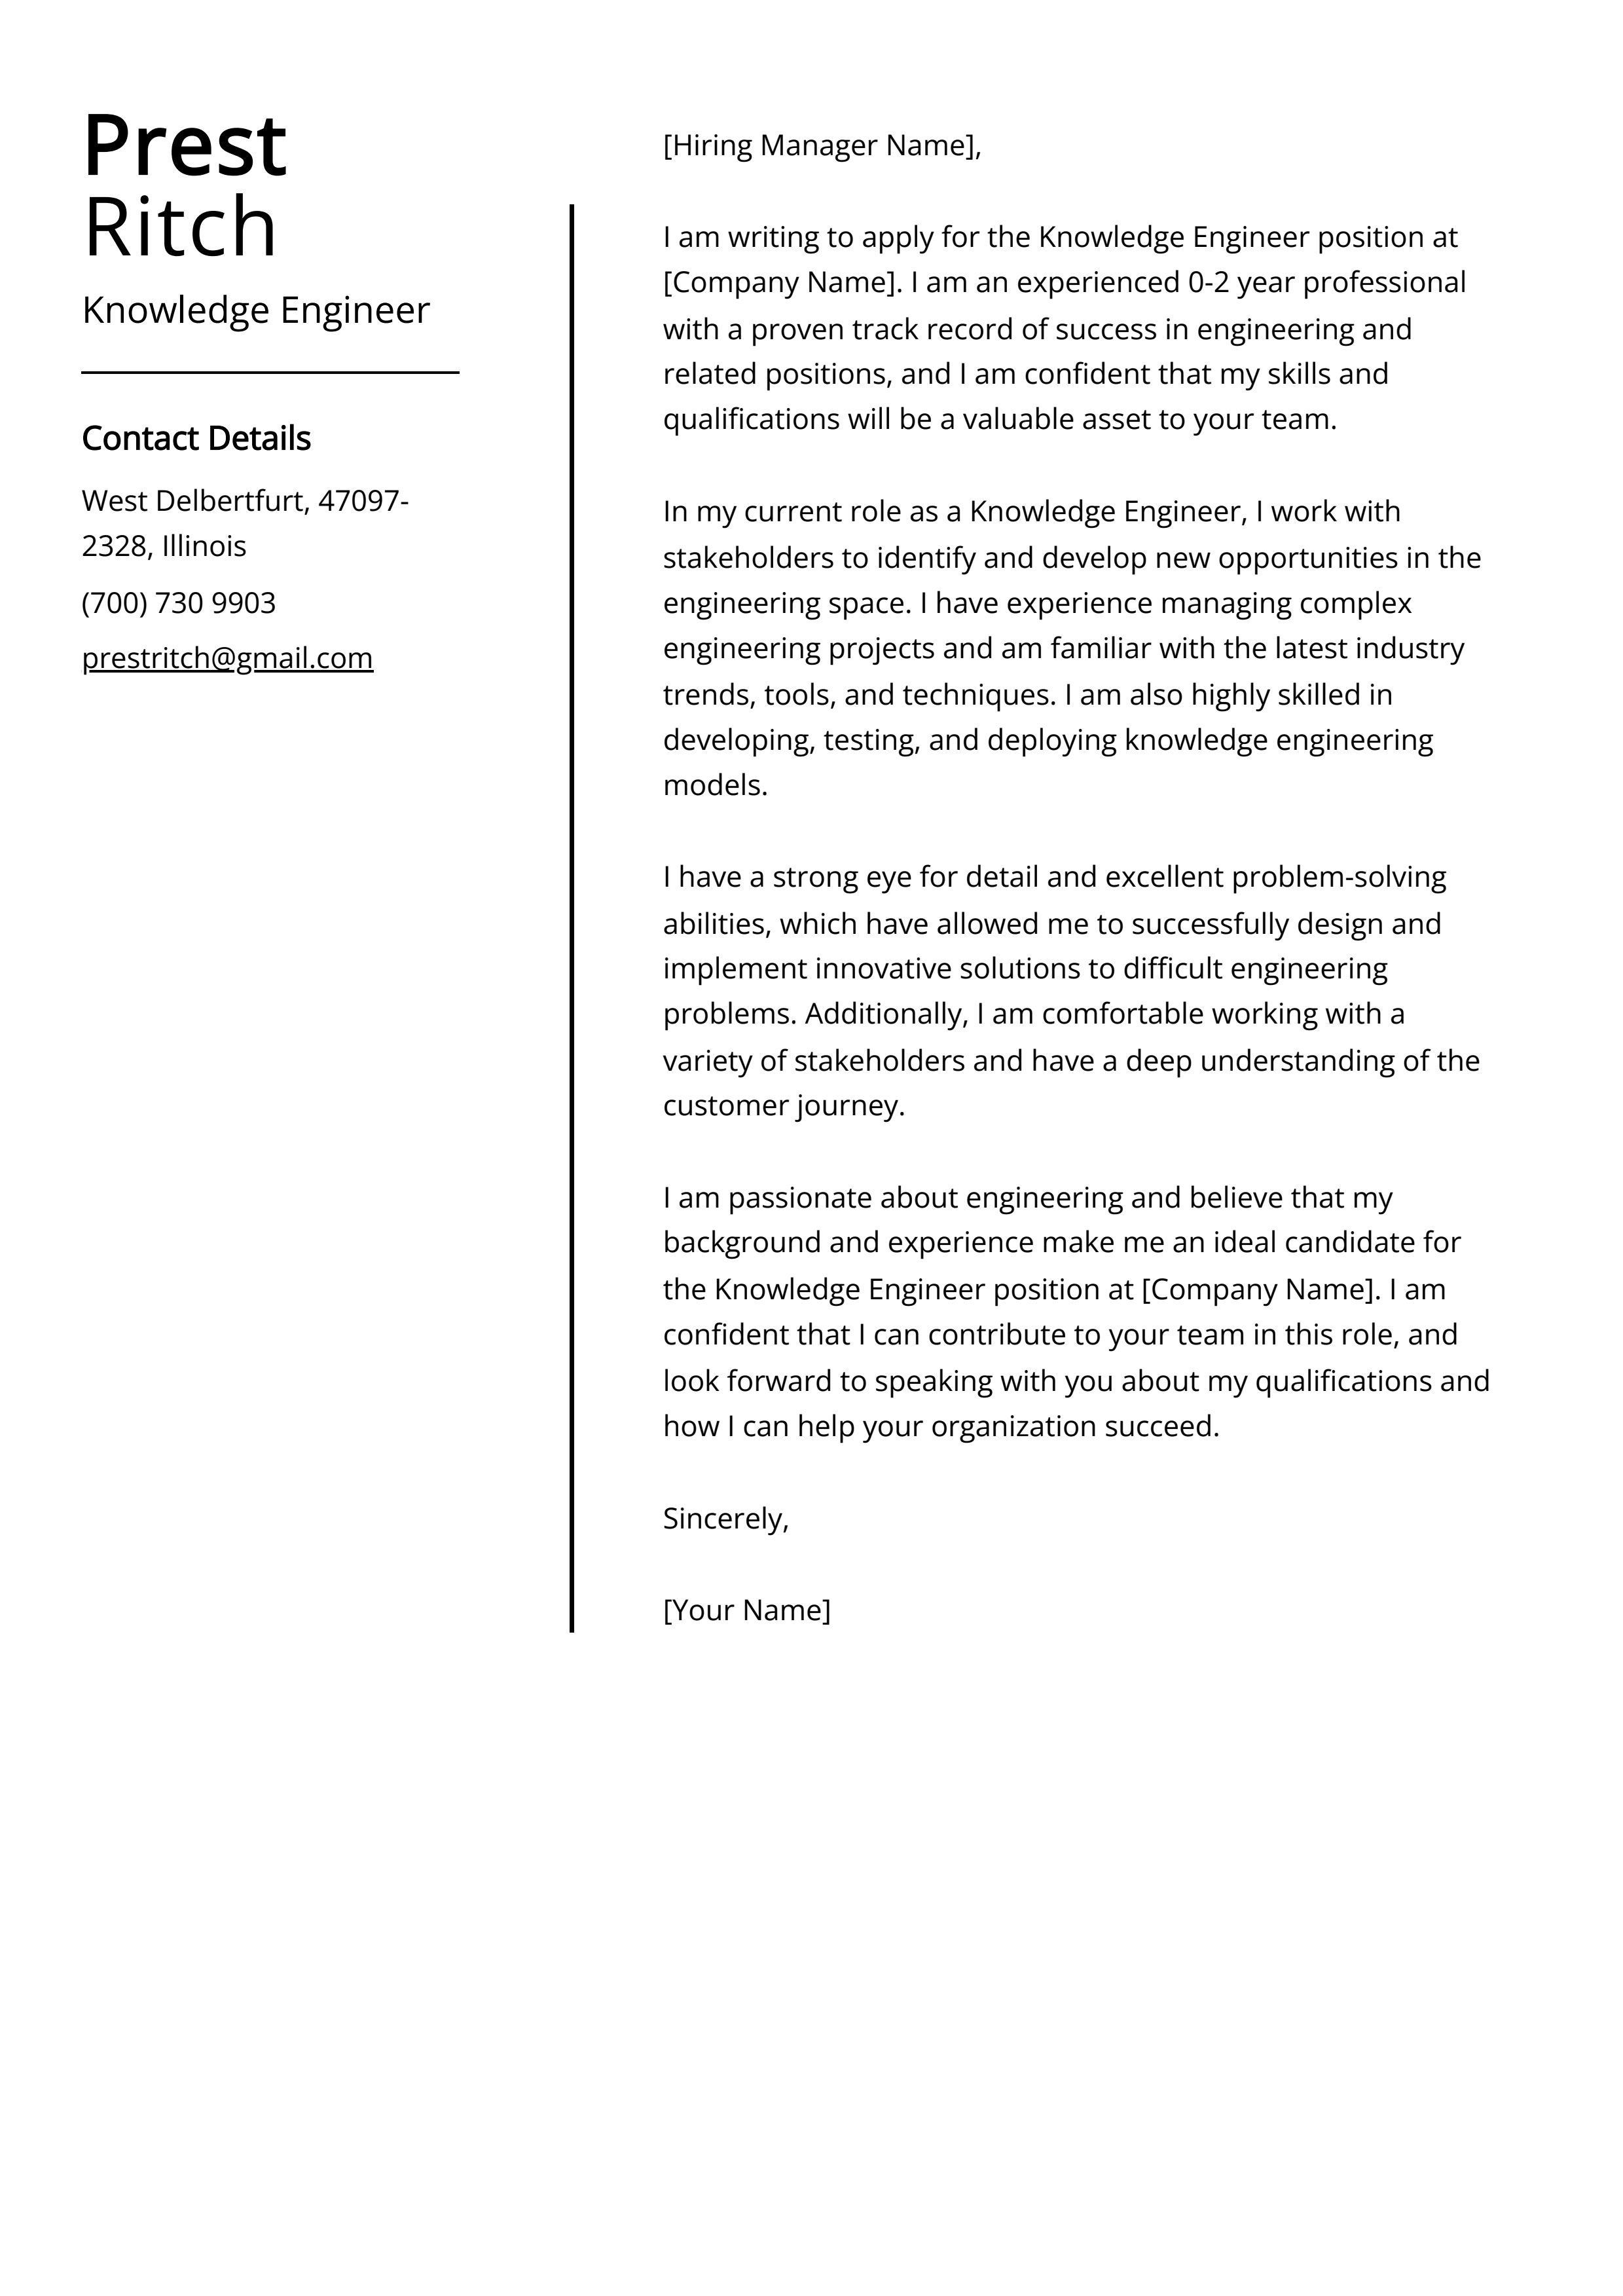 Knowledge Engineer Cover Letter Example